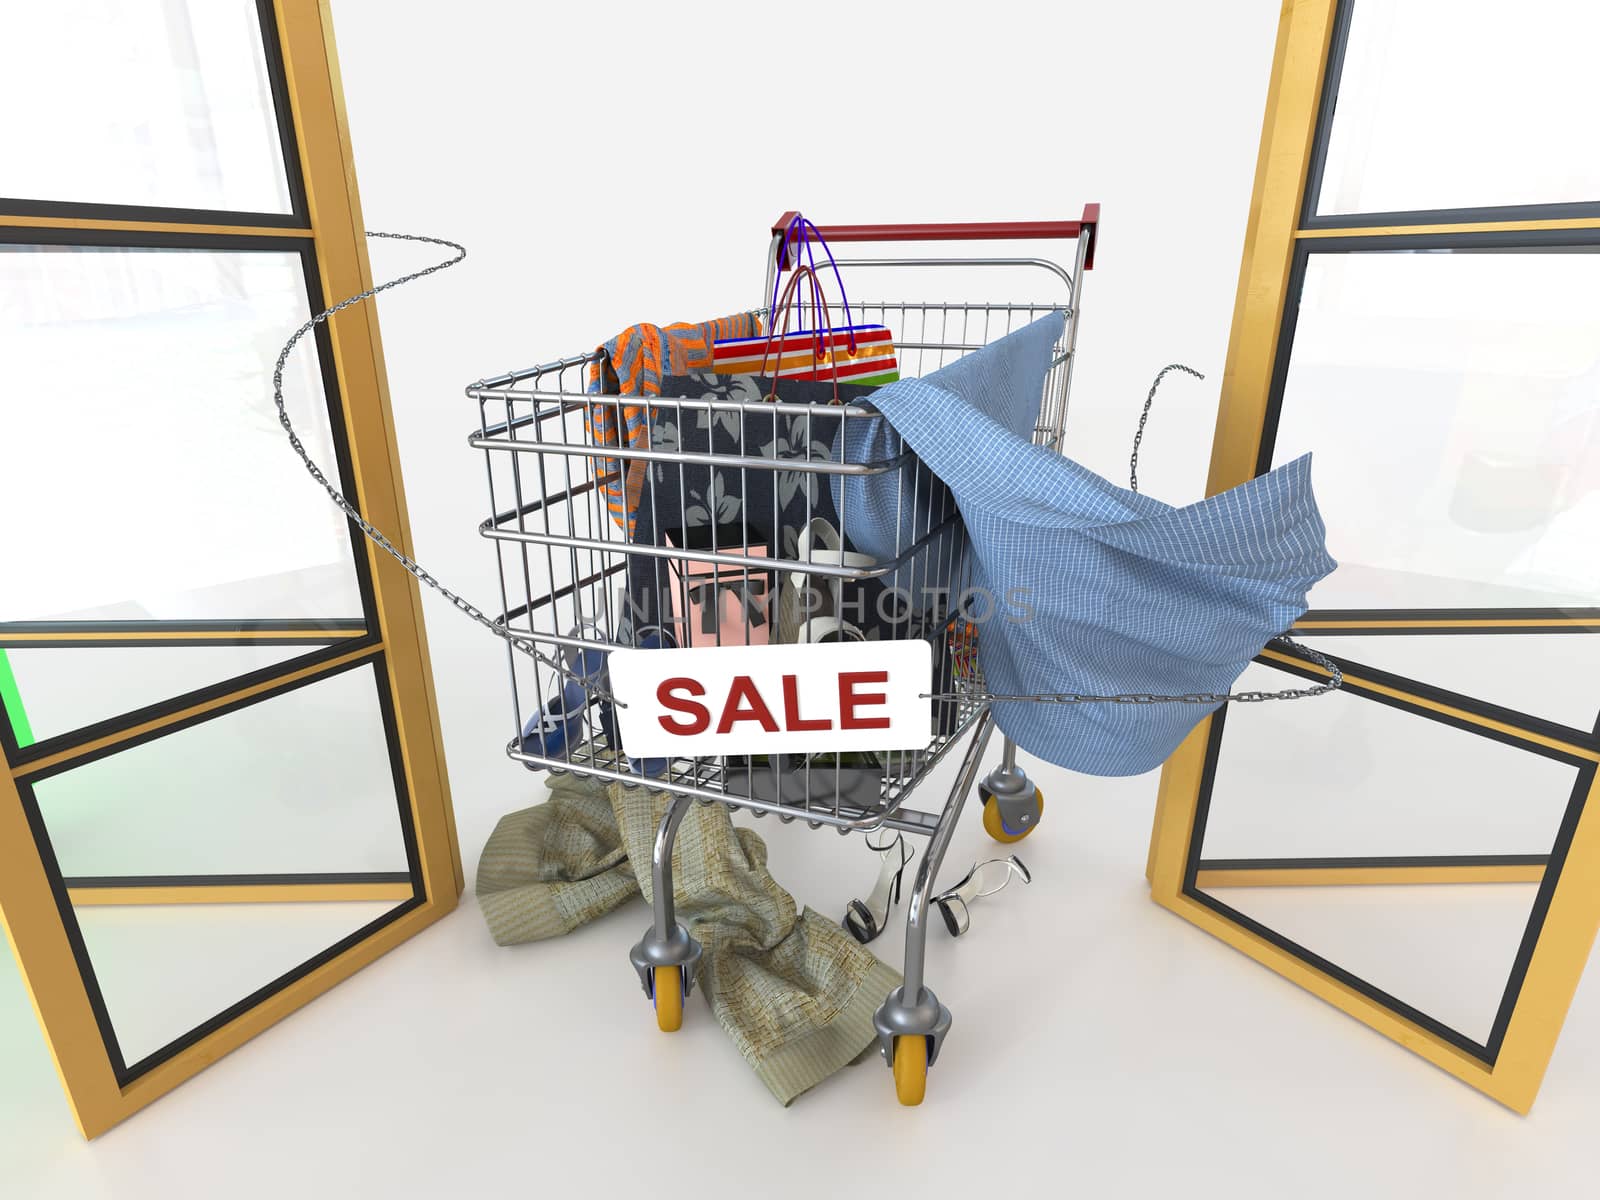 shopping sale concept background with shopping trolley on isolate white